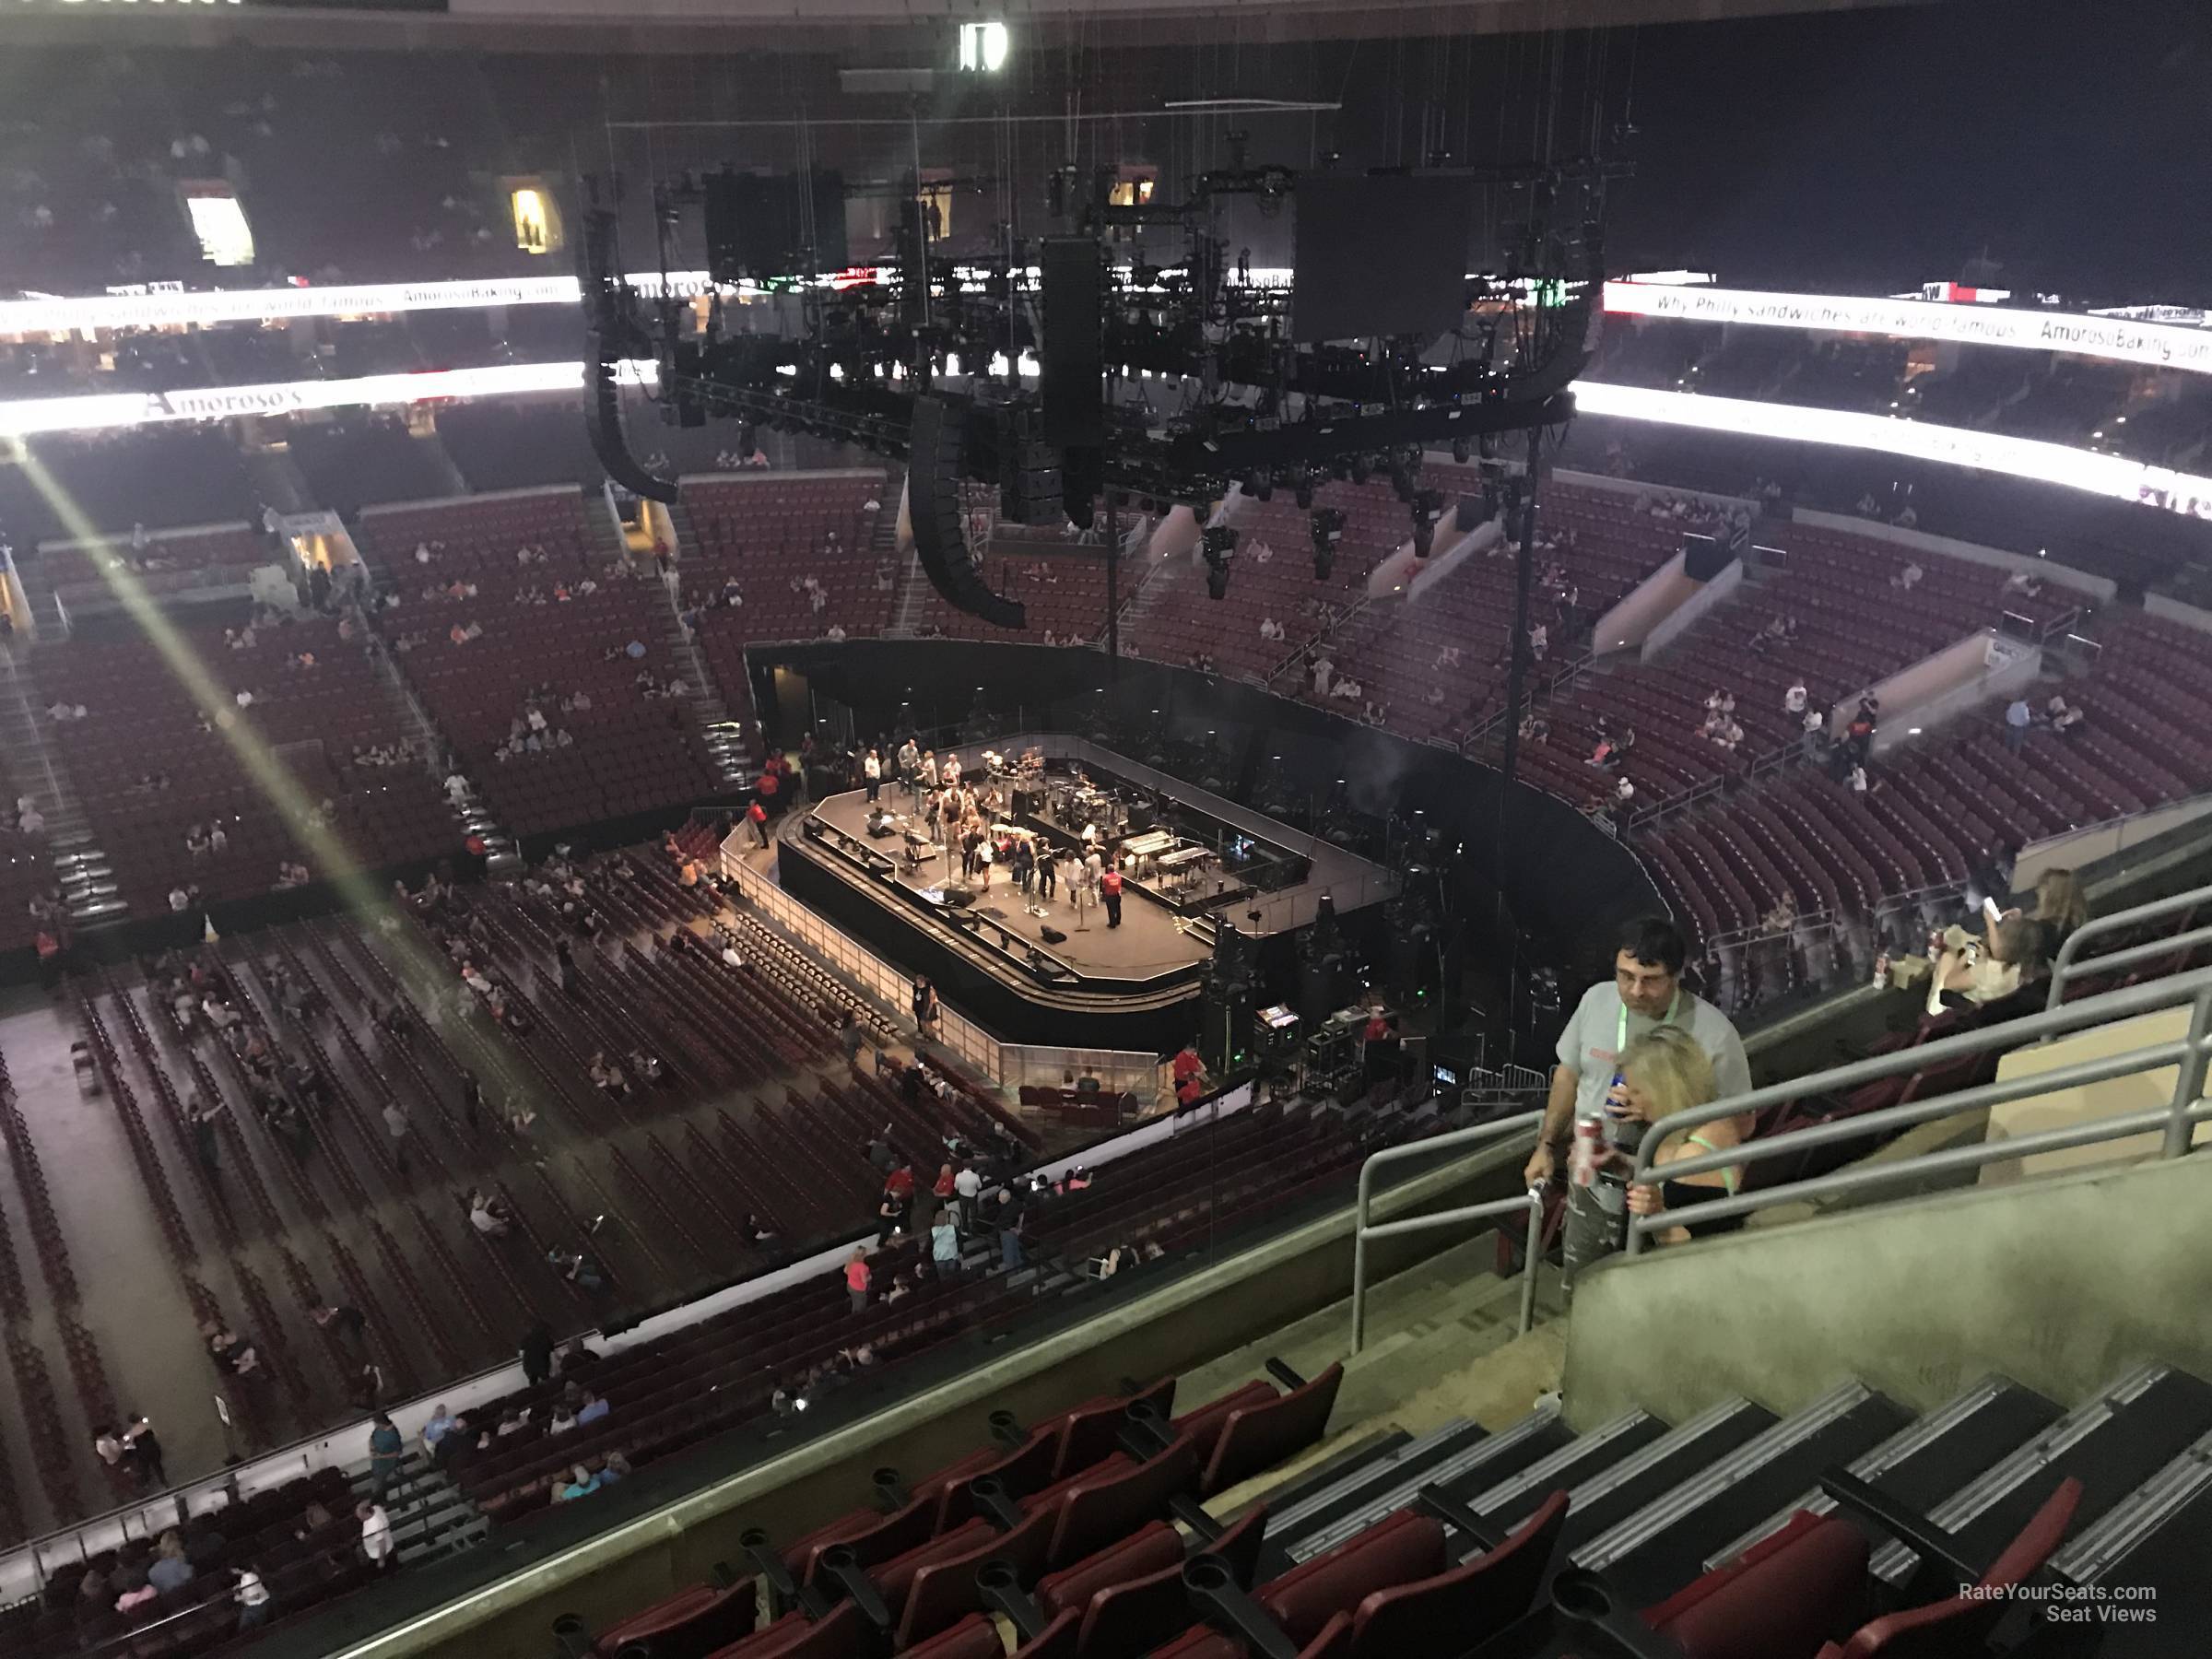 section 213, row 7 seat view  for concert - wells fargo center